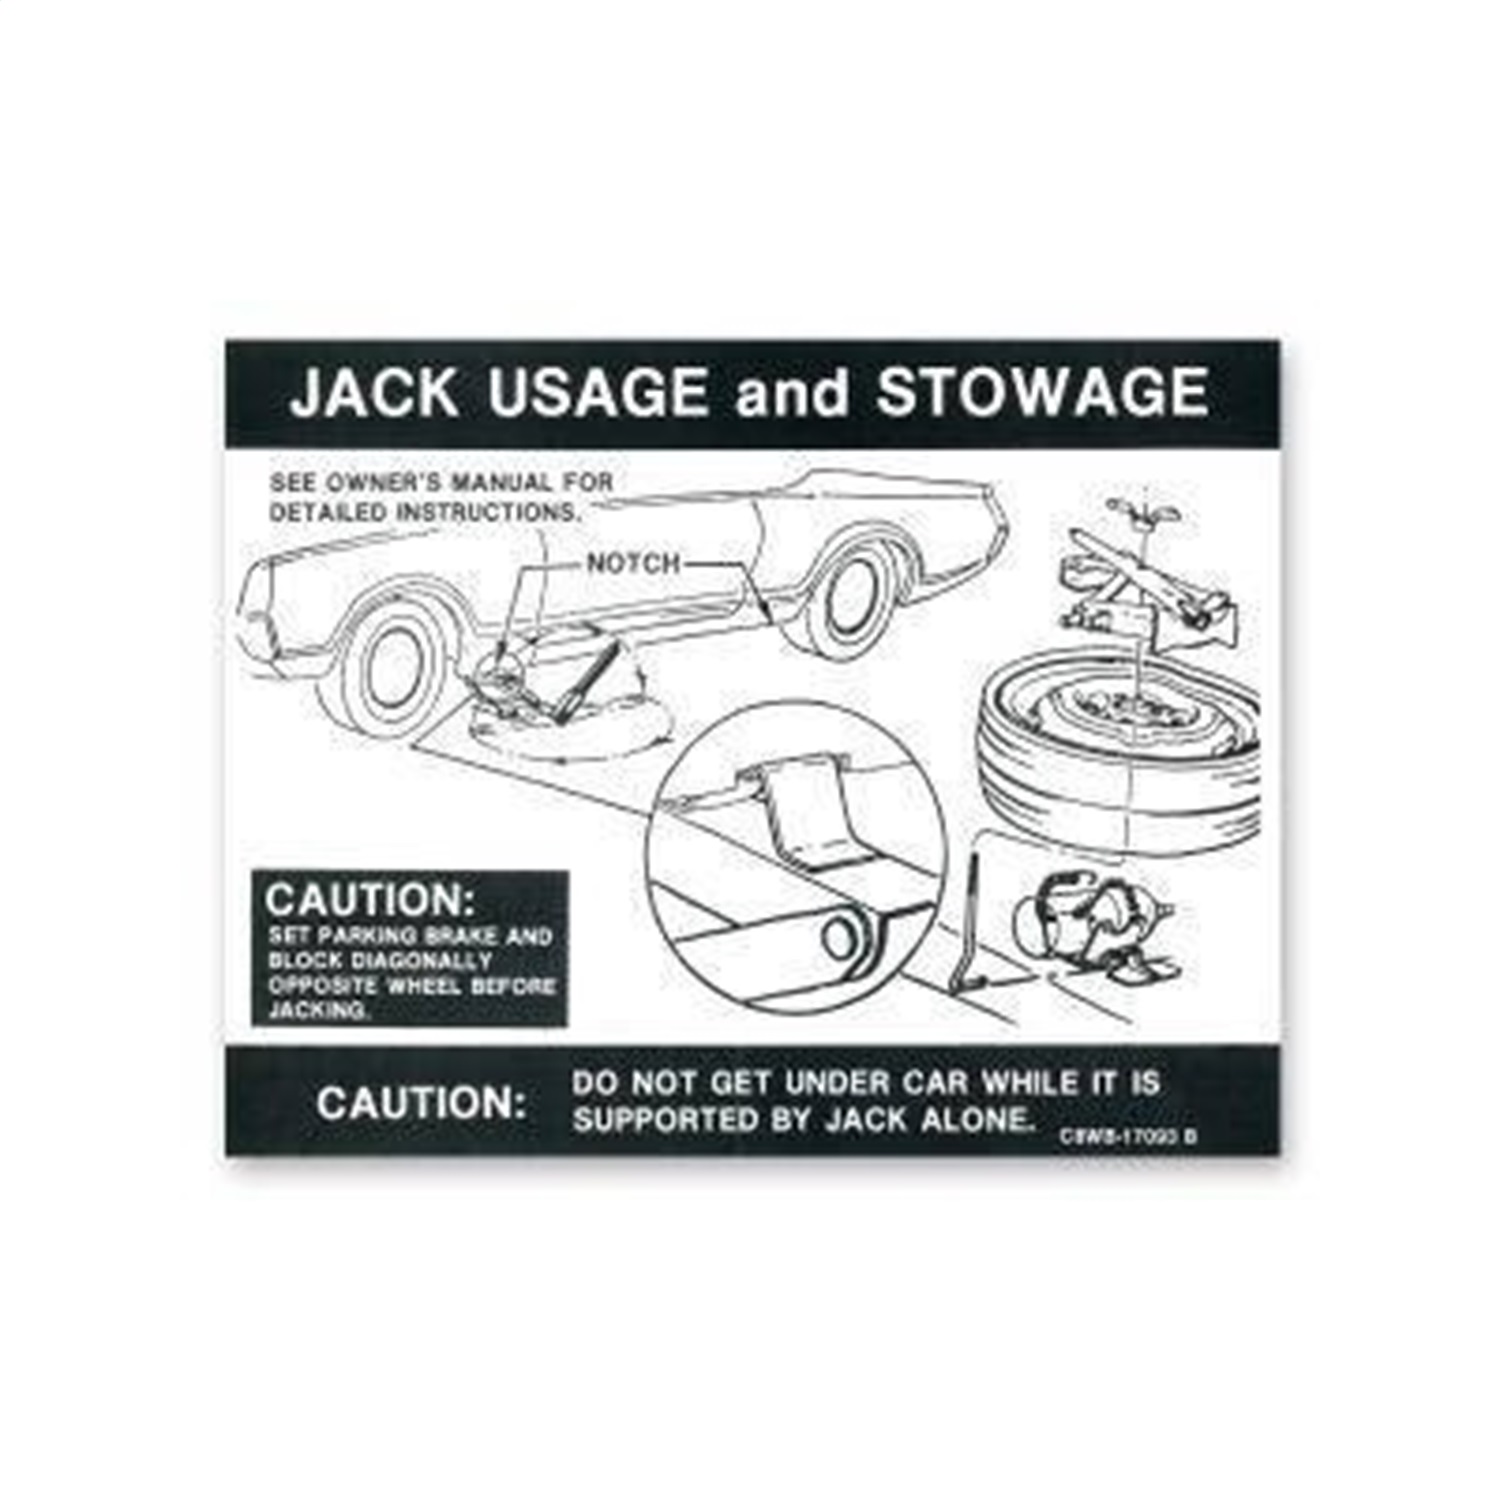 JACK INSTRUCTIONS DECAL